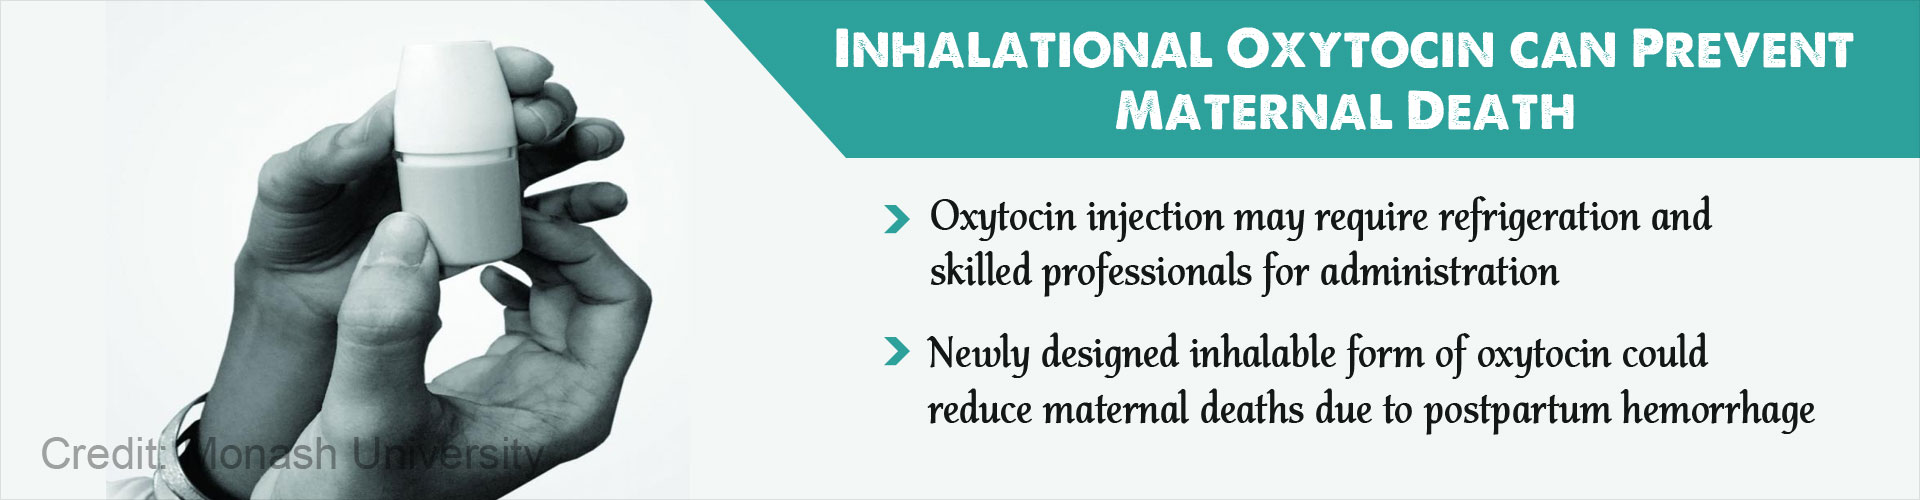 Inhalational oxytocin can prevent maternal death
- Oxytocin injection may require refrigeration and skilled professionals for administration
- Newly designed inhalable for of oxytocin could reduce maternal deaths due to postpartum hemorrhage